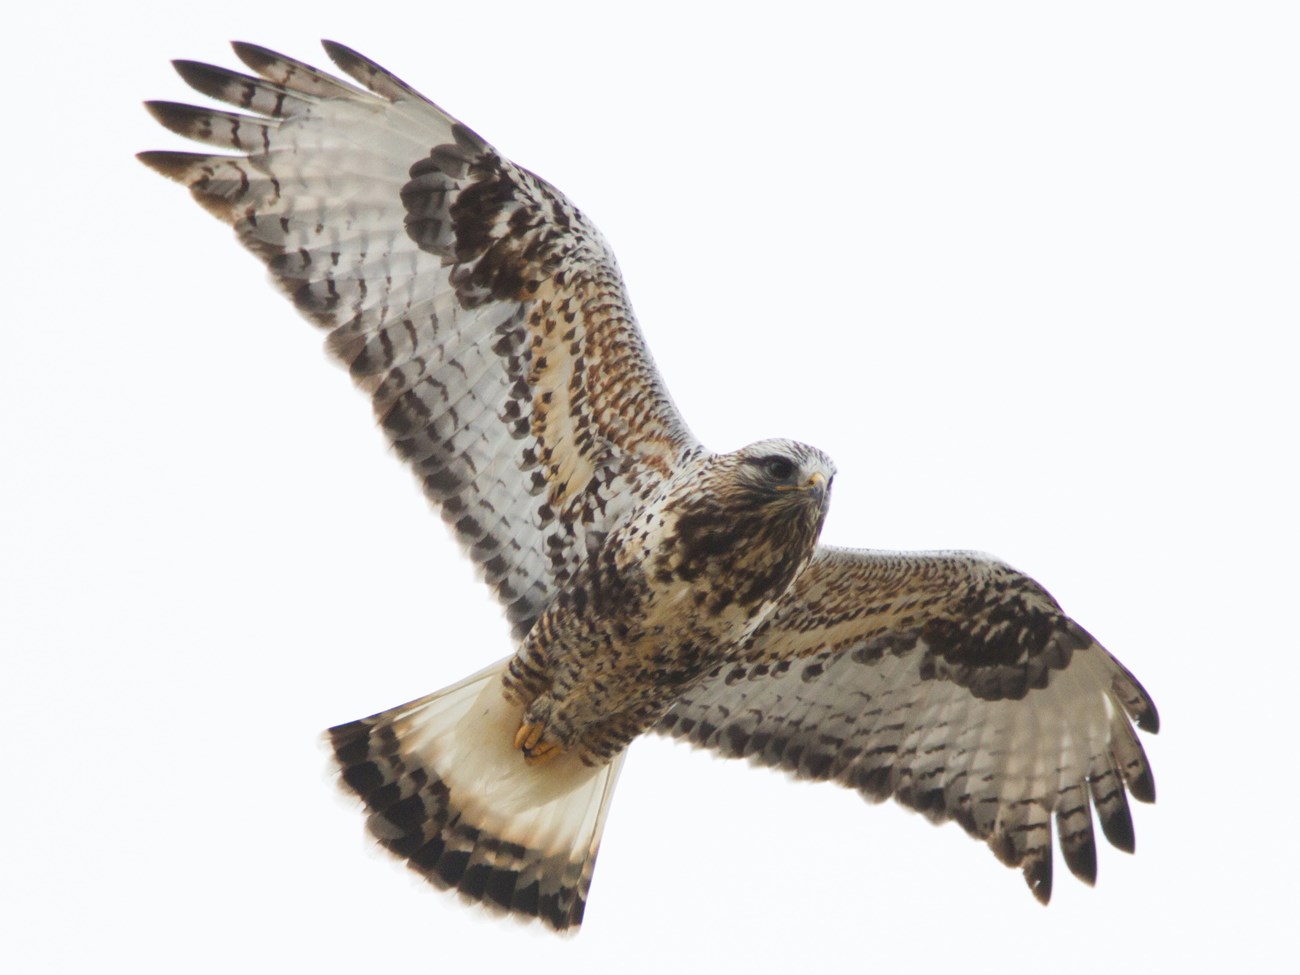 Large hawk in flight with dark coloring at the bend in the wings, whitish flight feathers, dark and light coloration on the body, and a dark tail band.